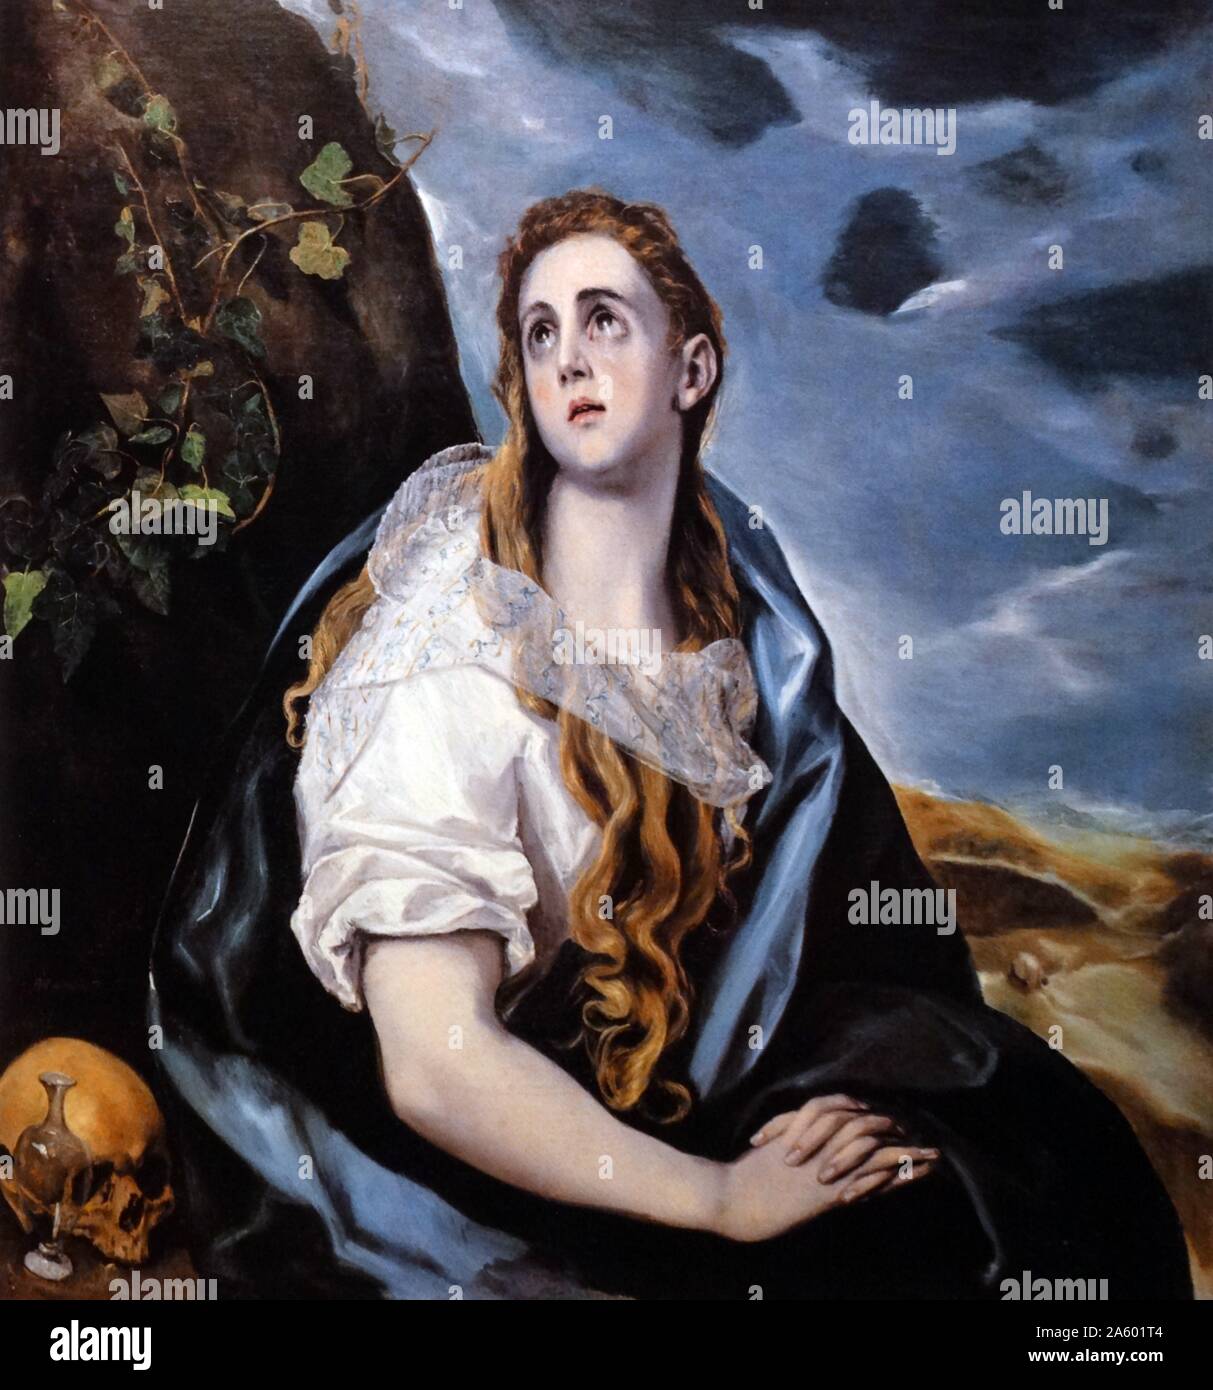 Painting titled 'Saint Mary Magadlen in Penitence' by El Greco (1541-1614) a painter, sculptor and architect of the Spanish Renaissance. Dated 17th Century Stock Photo